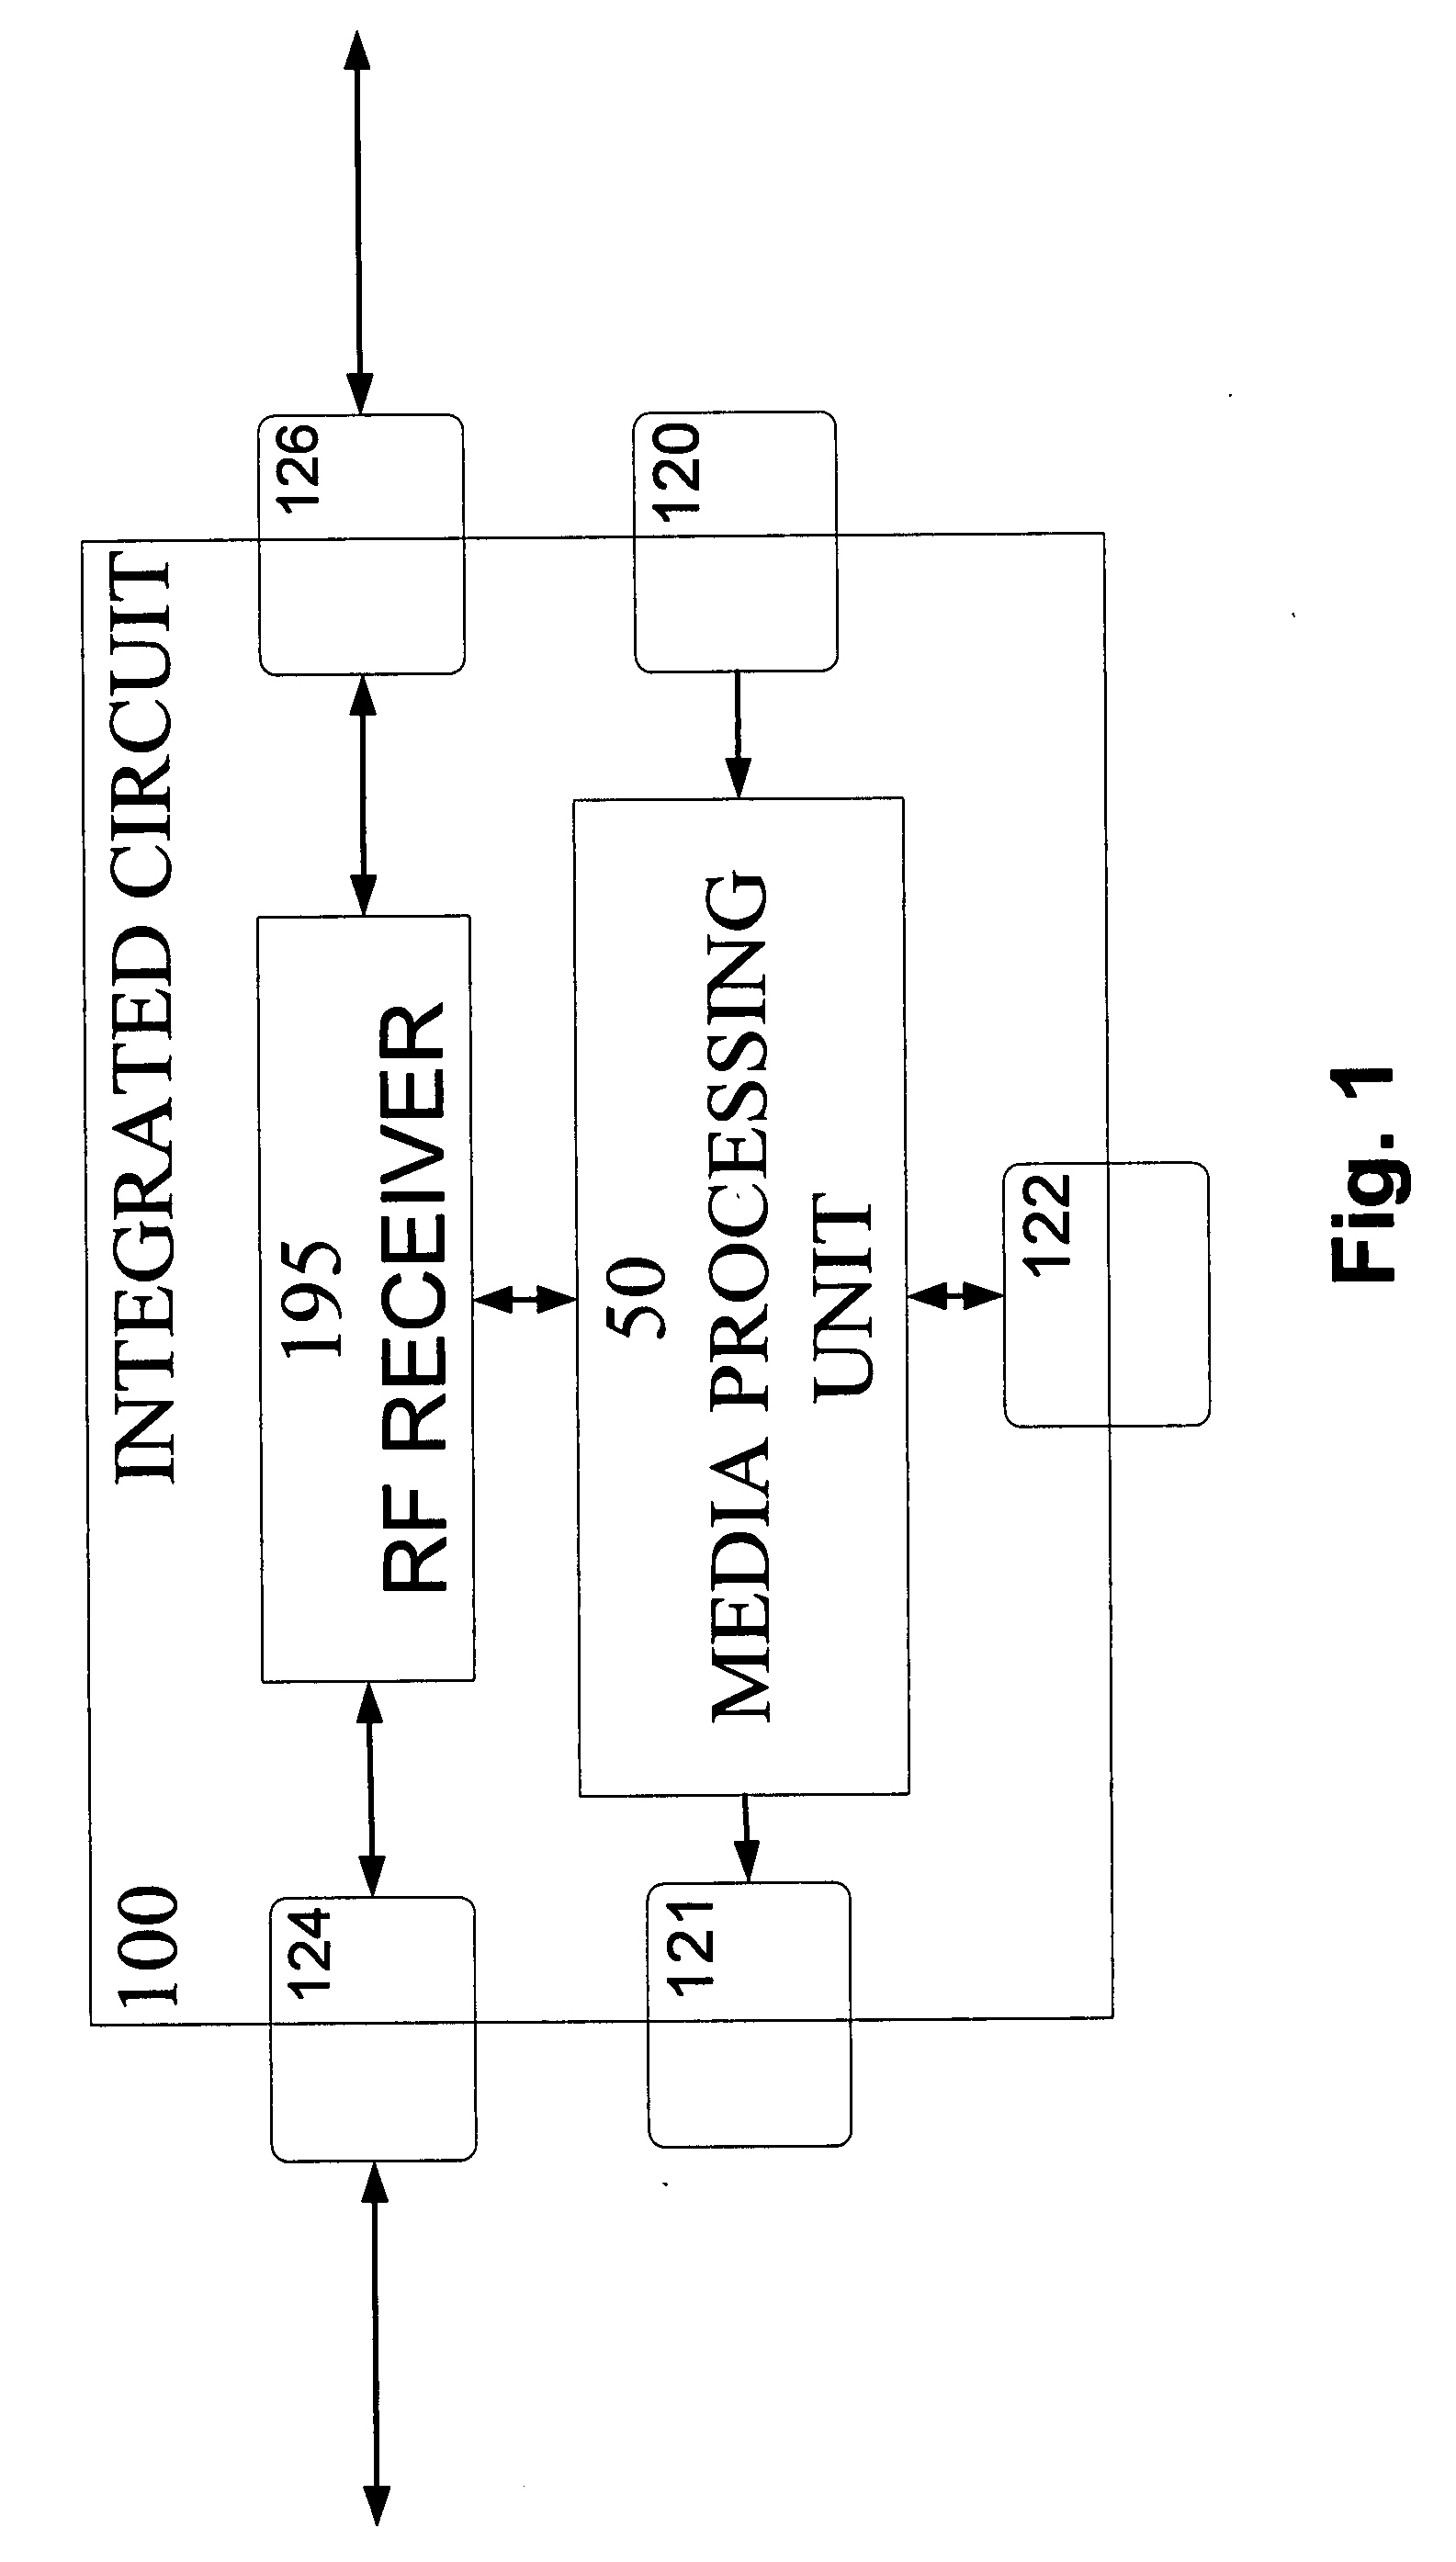 Media processor with an integrated TV receiver